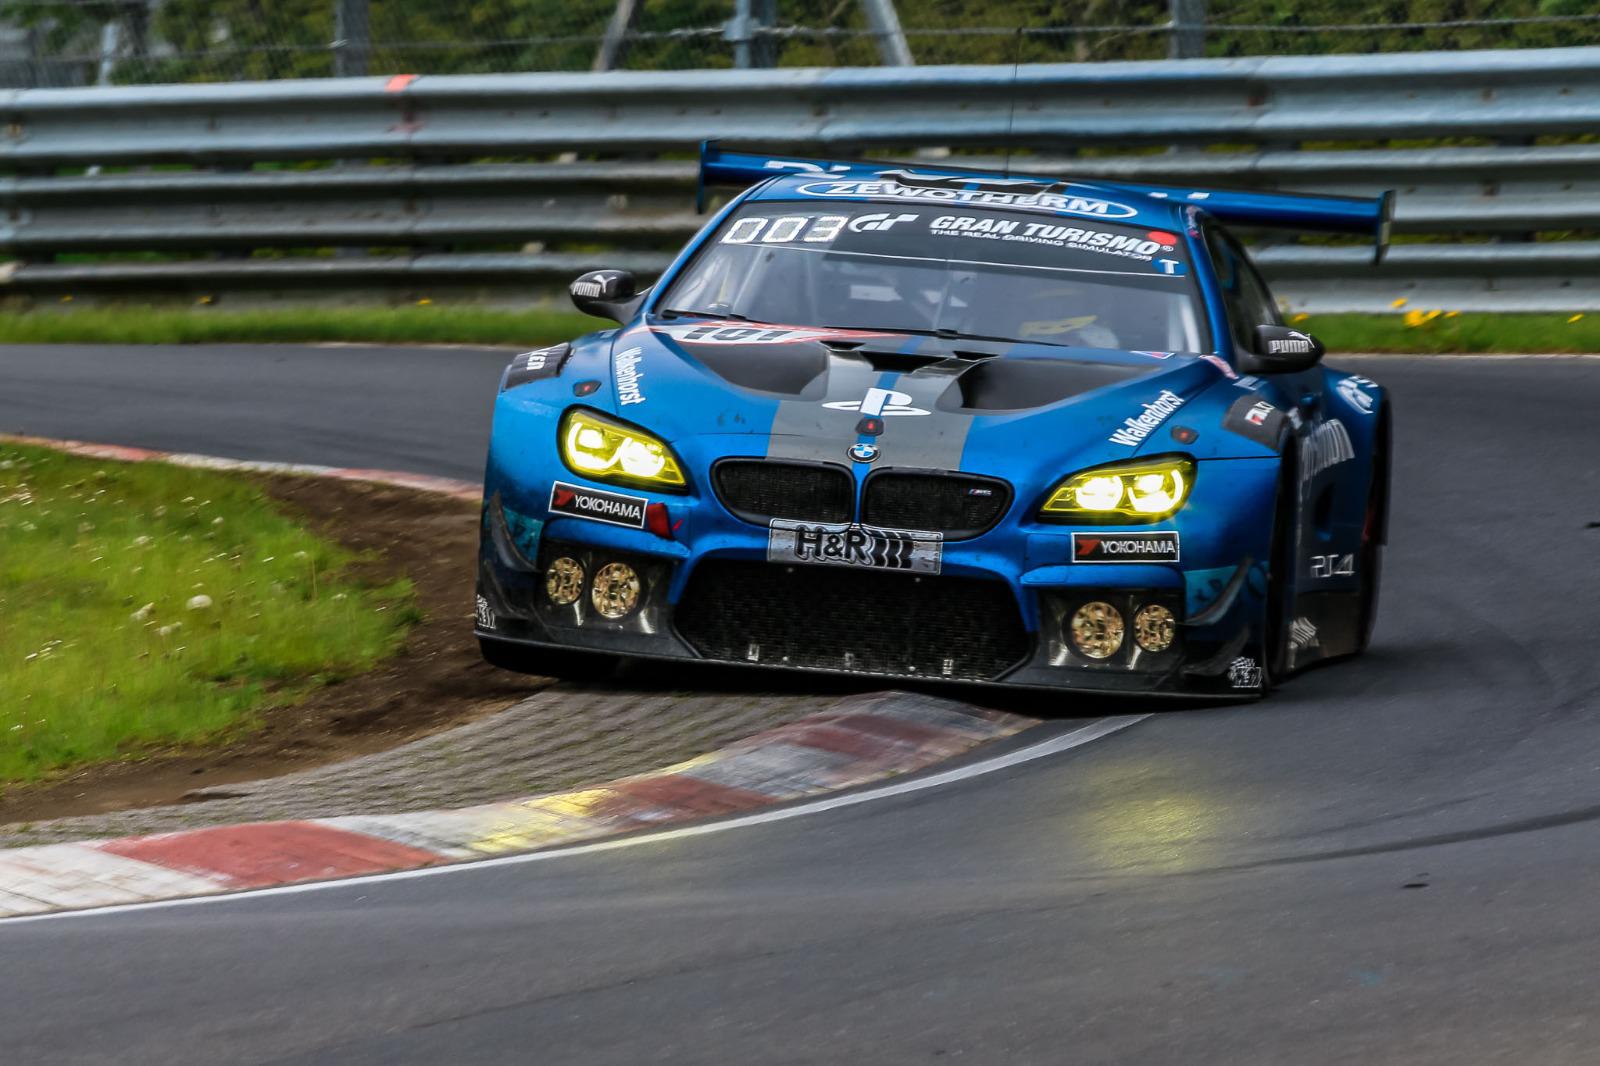 **preparation for the 24 Hours of Nürburgring**